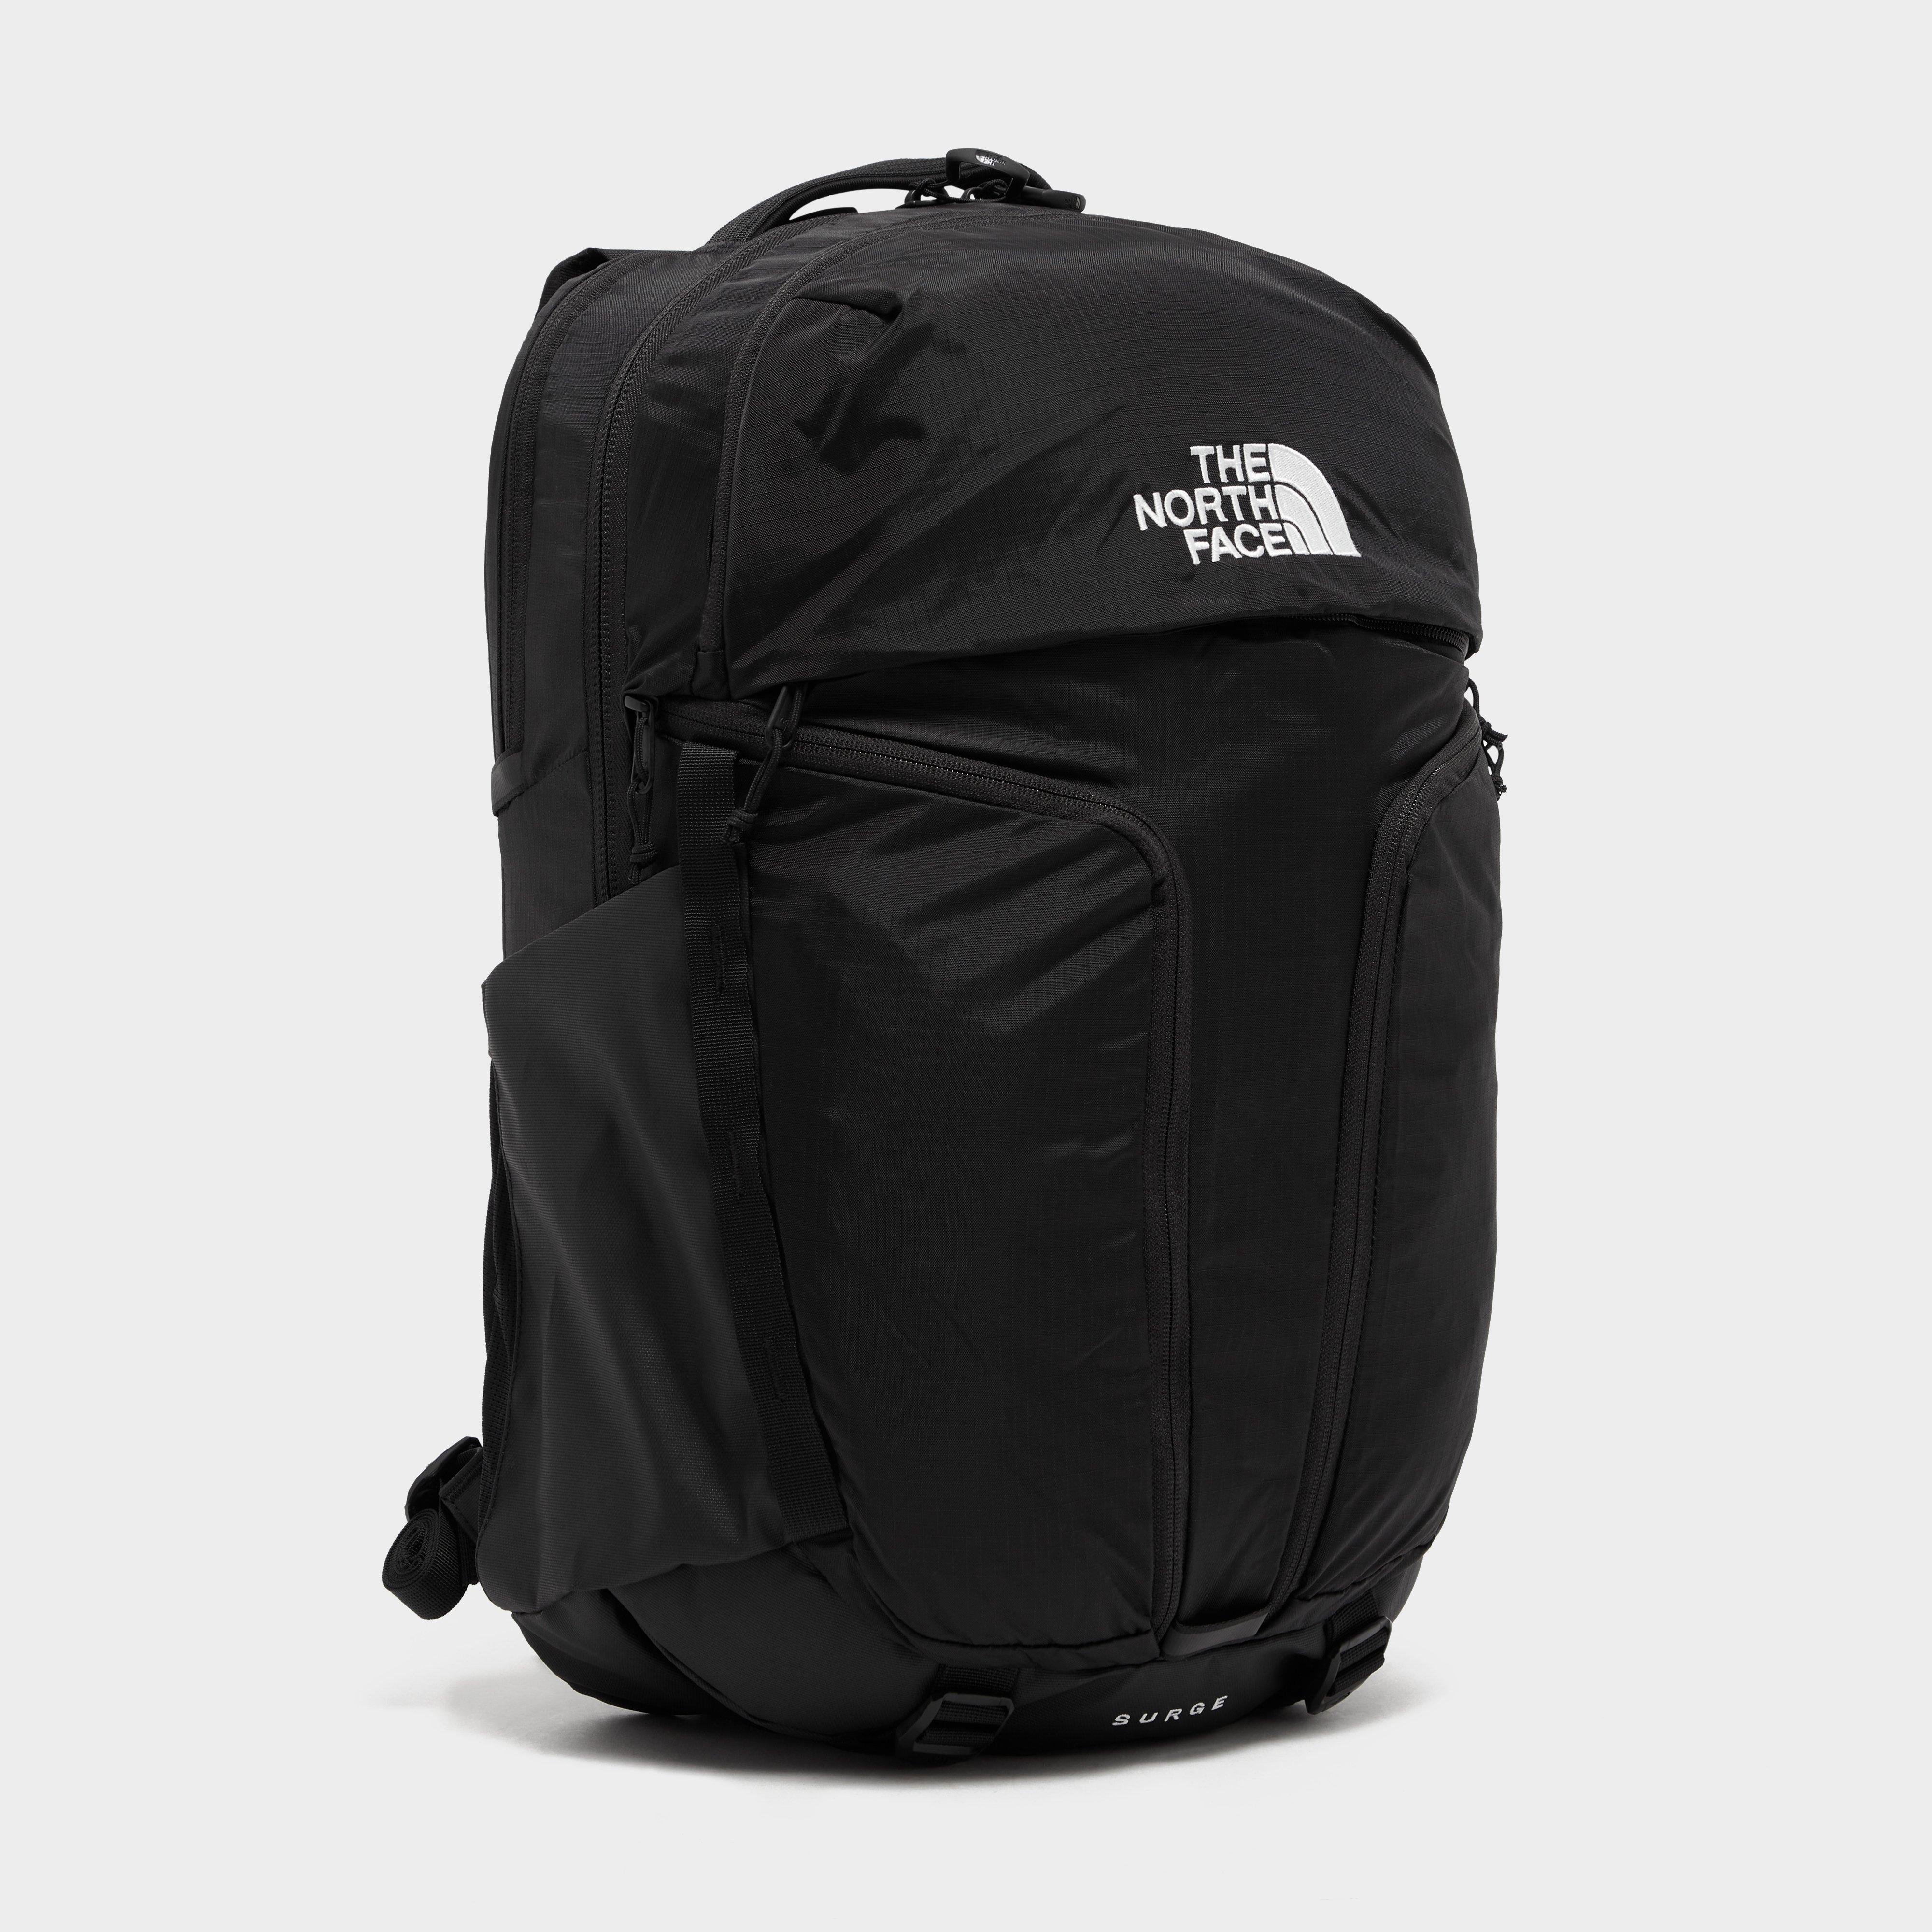 The North Face The North Face Surge Backpack - Black, Black